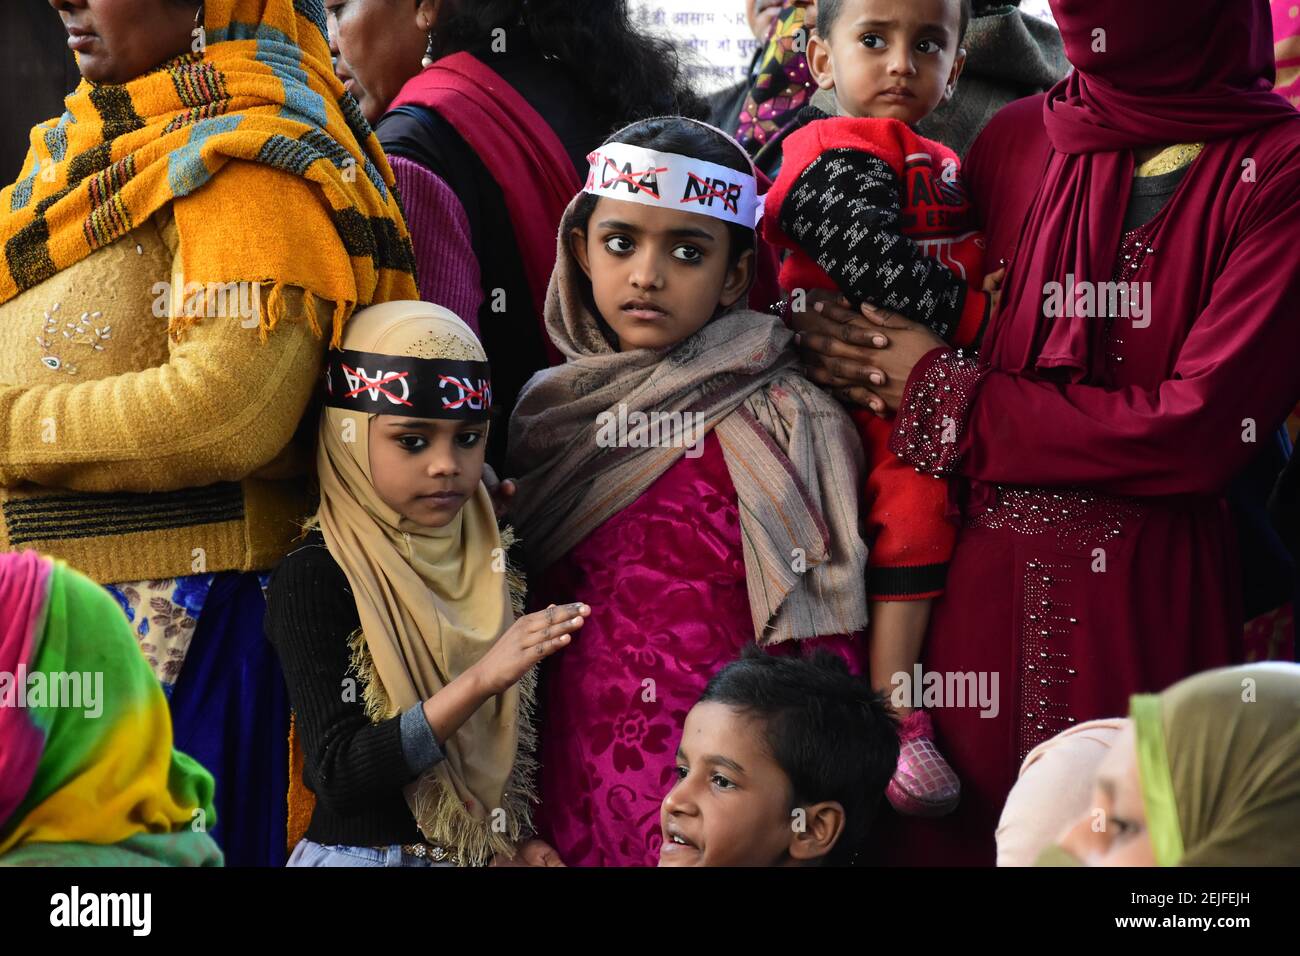 Kids with headbands during the protest. It is over 50 days of protest  against India's new citizenship law, demonstrators blocked off Shaheen Bagh  area close to the Jamia Millia Islamia University. (Photo